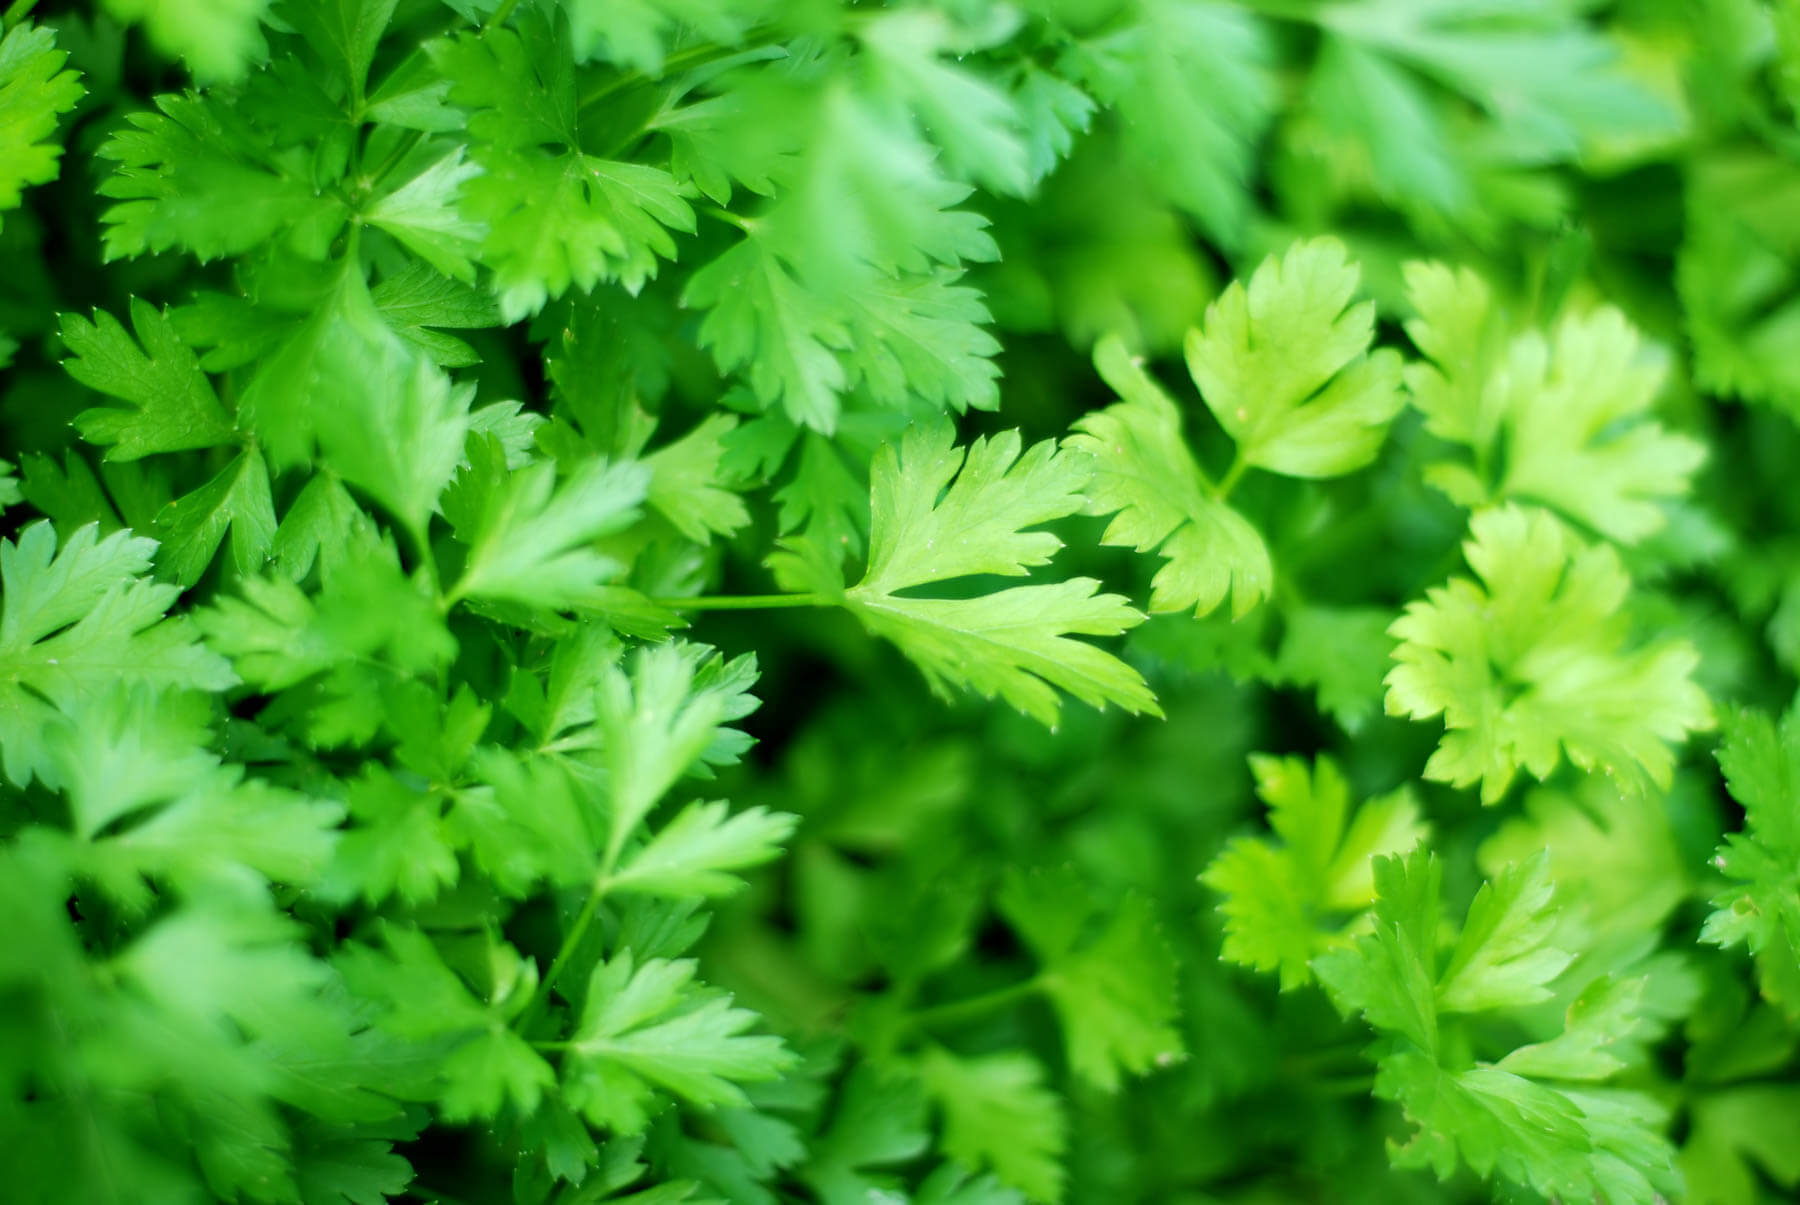 Image of A tomato plant with parsley leaves growing at its base